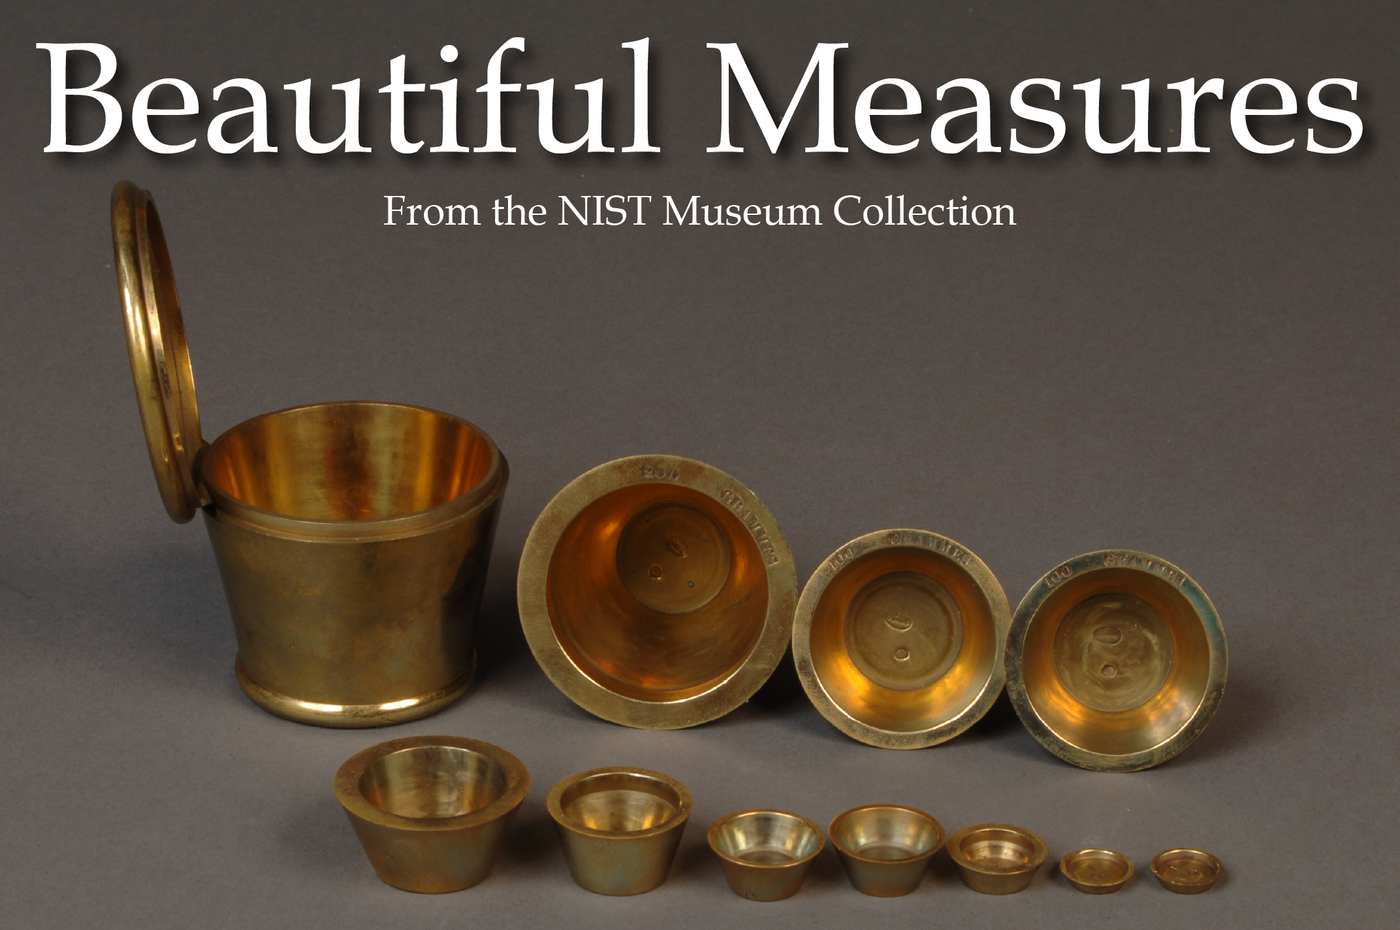 French Nested Weights with "Beautiful Measures: from the NIST Museum Collection" text overlaying